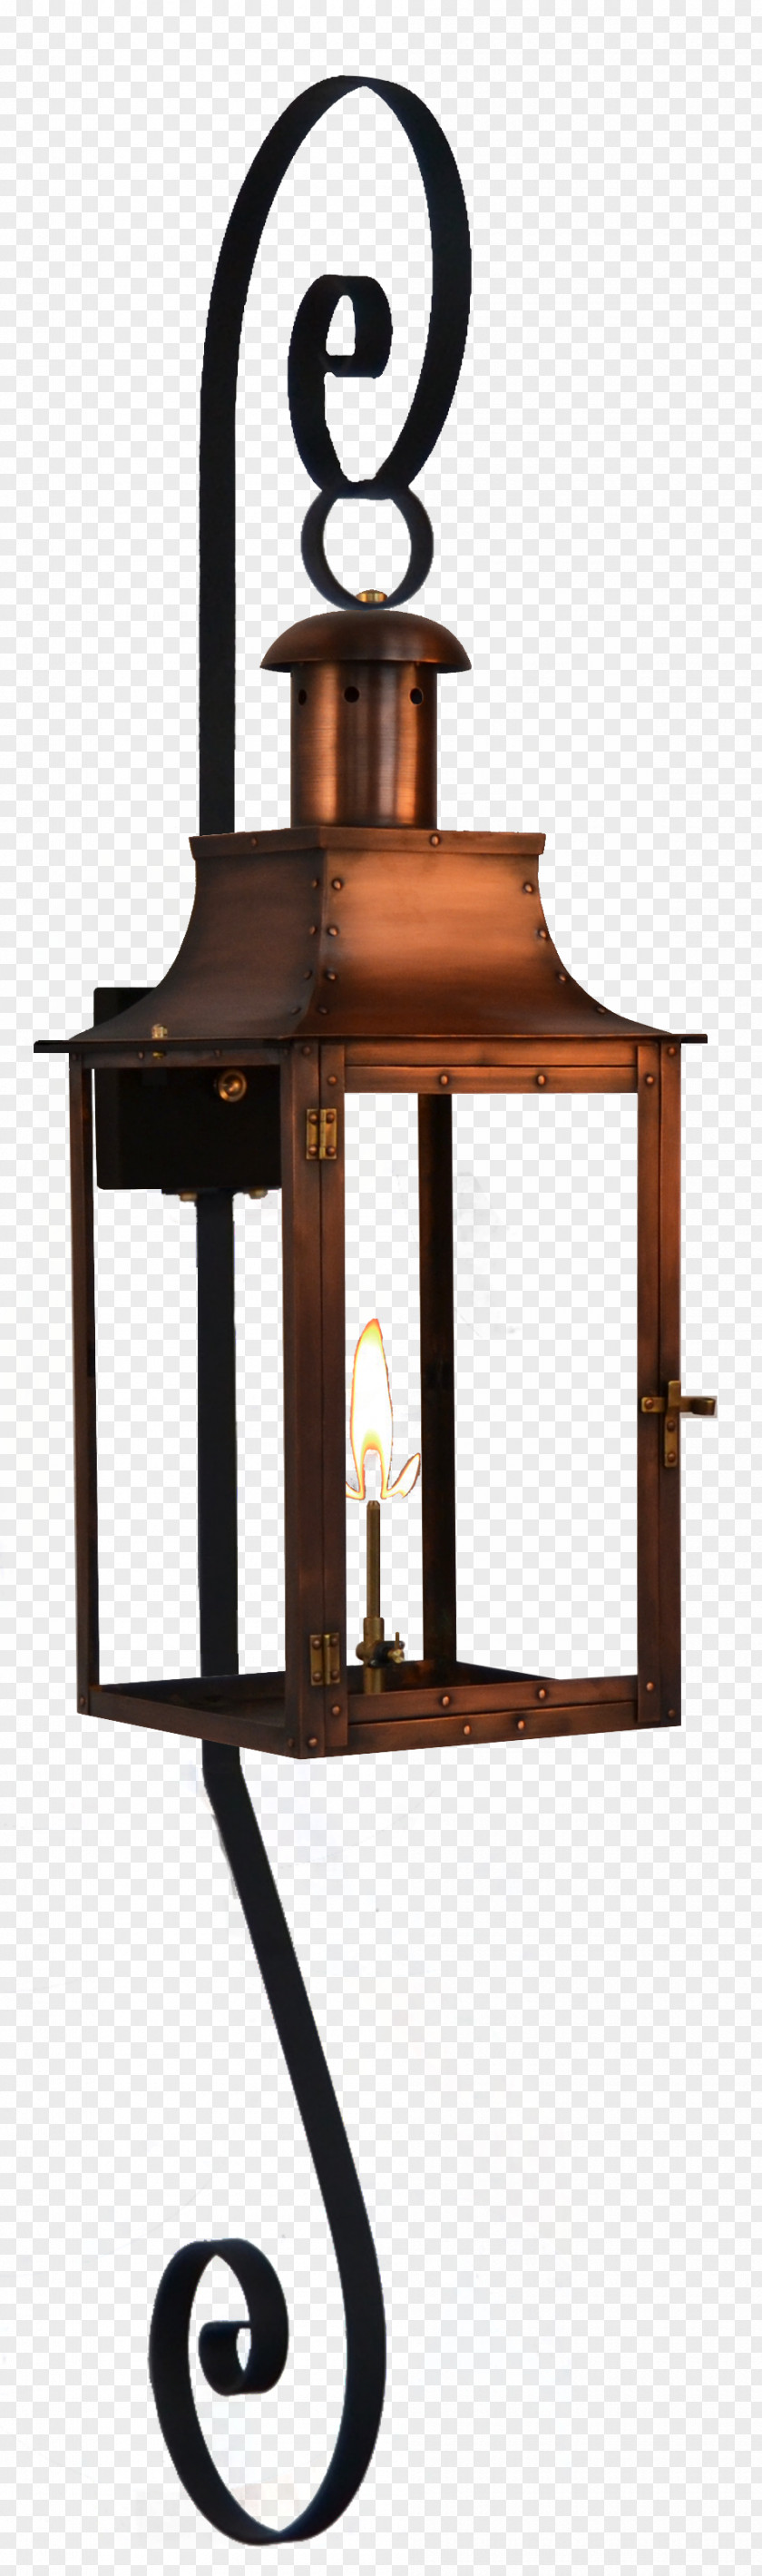 Light Fixture Lantern Coppersmith Bournemouth PNG